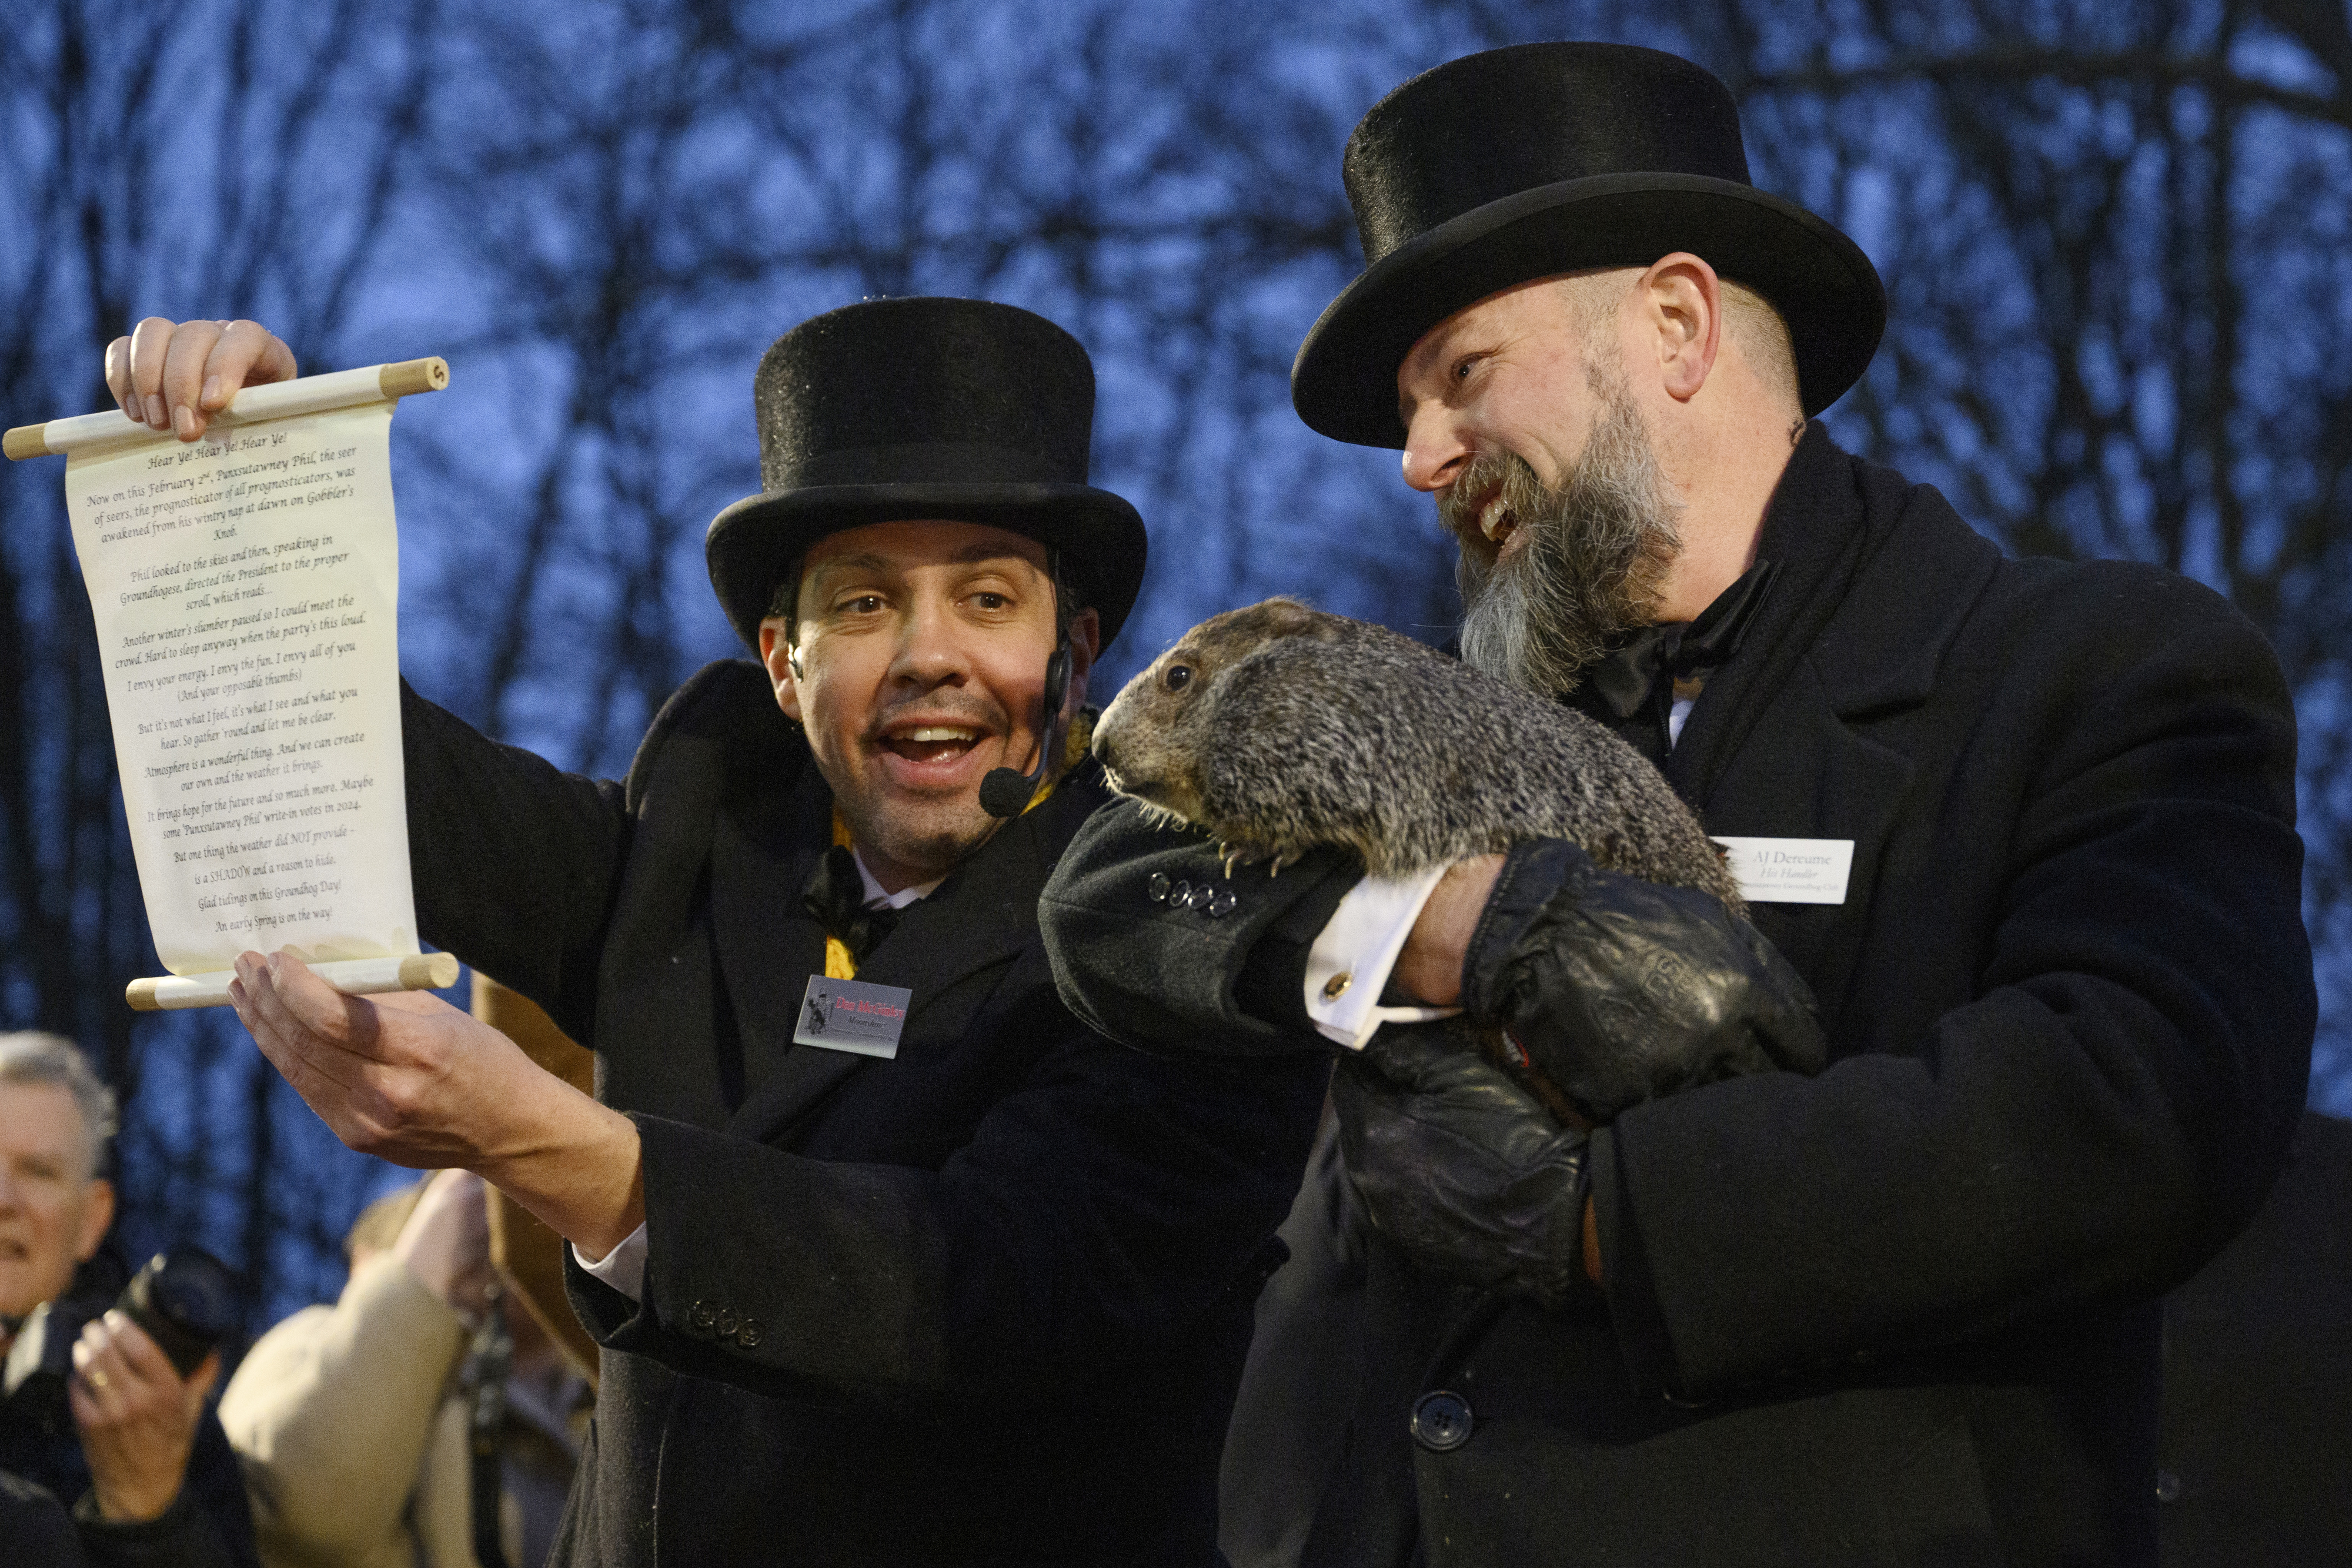 Two men in top hats hold a groundhog and a proclamation at a Groundhog Day event